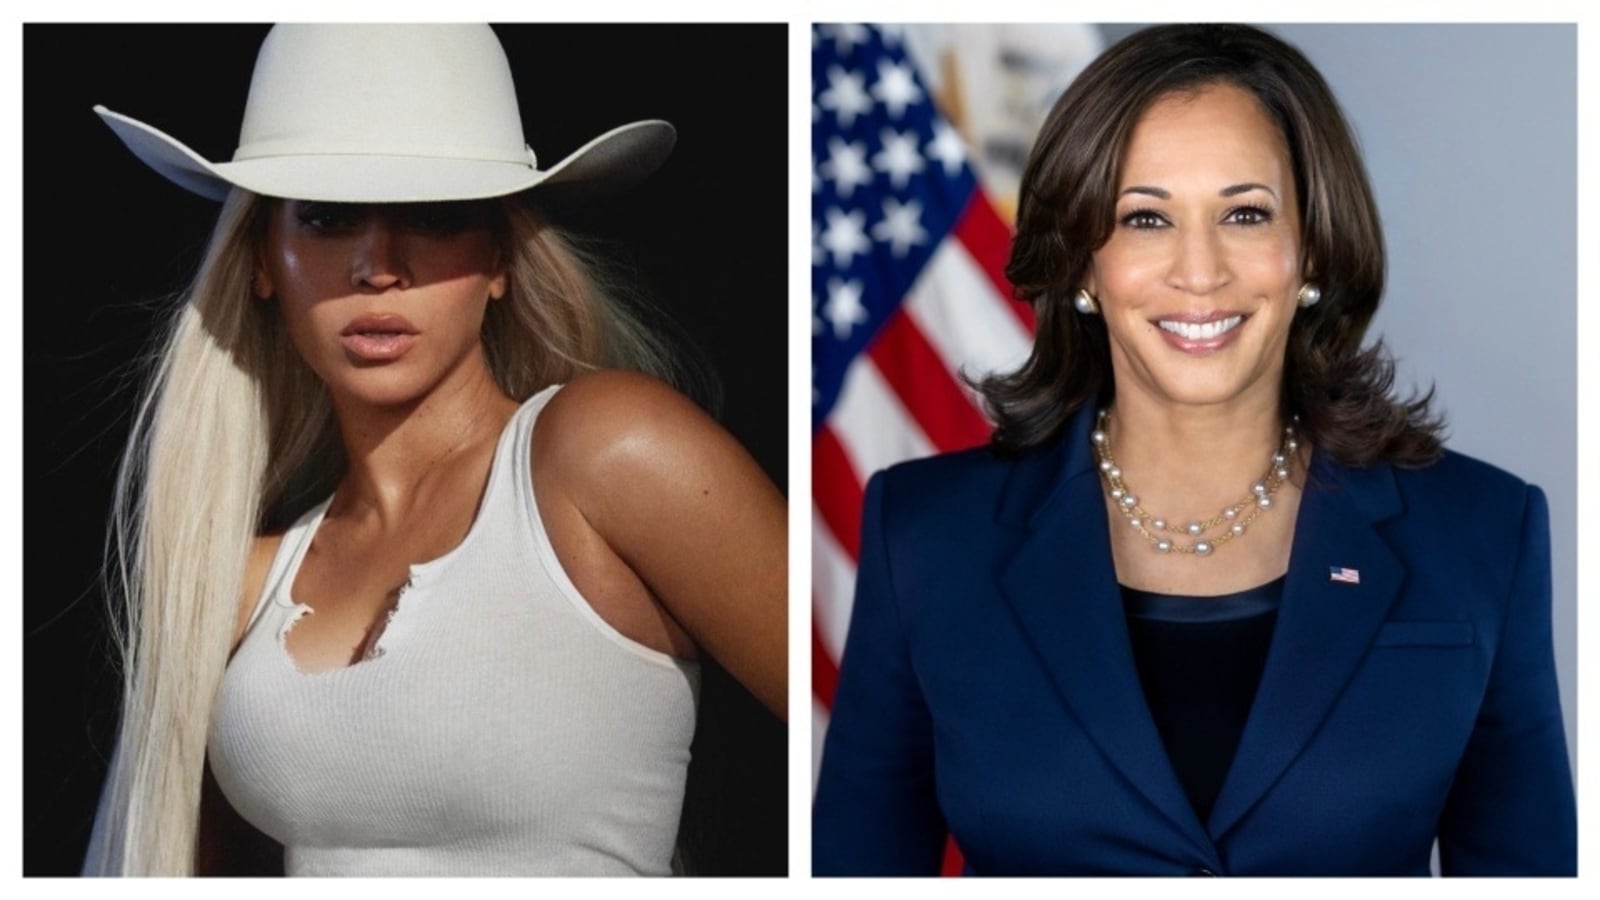 Report: Beyoncé gave Kamala Harris permission to use her song “Freedom” for the US presidential election campaign